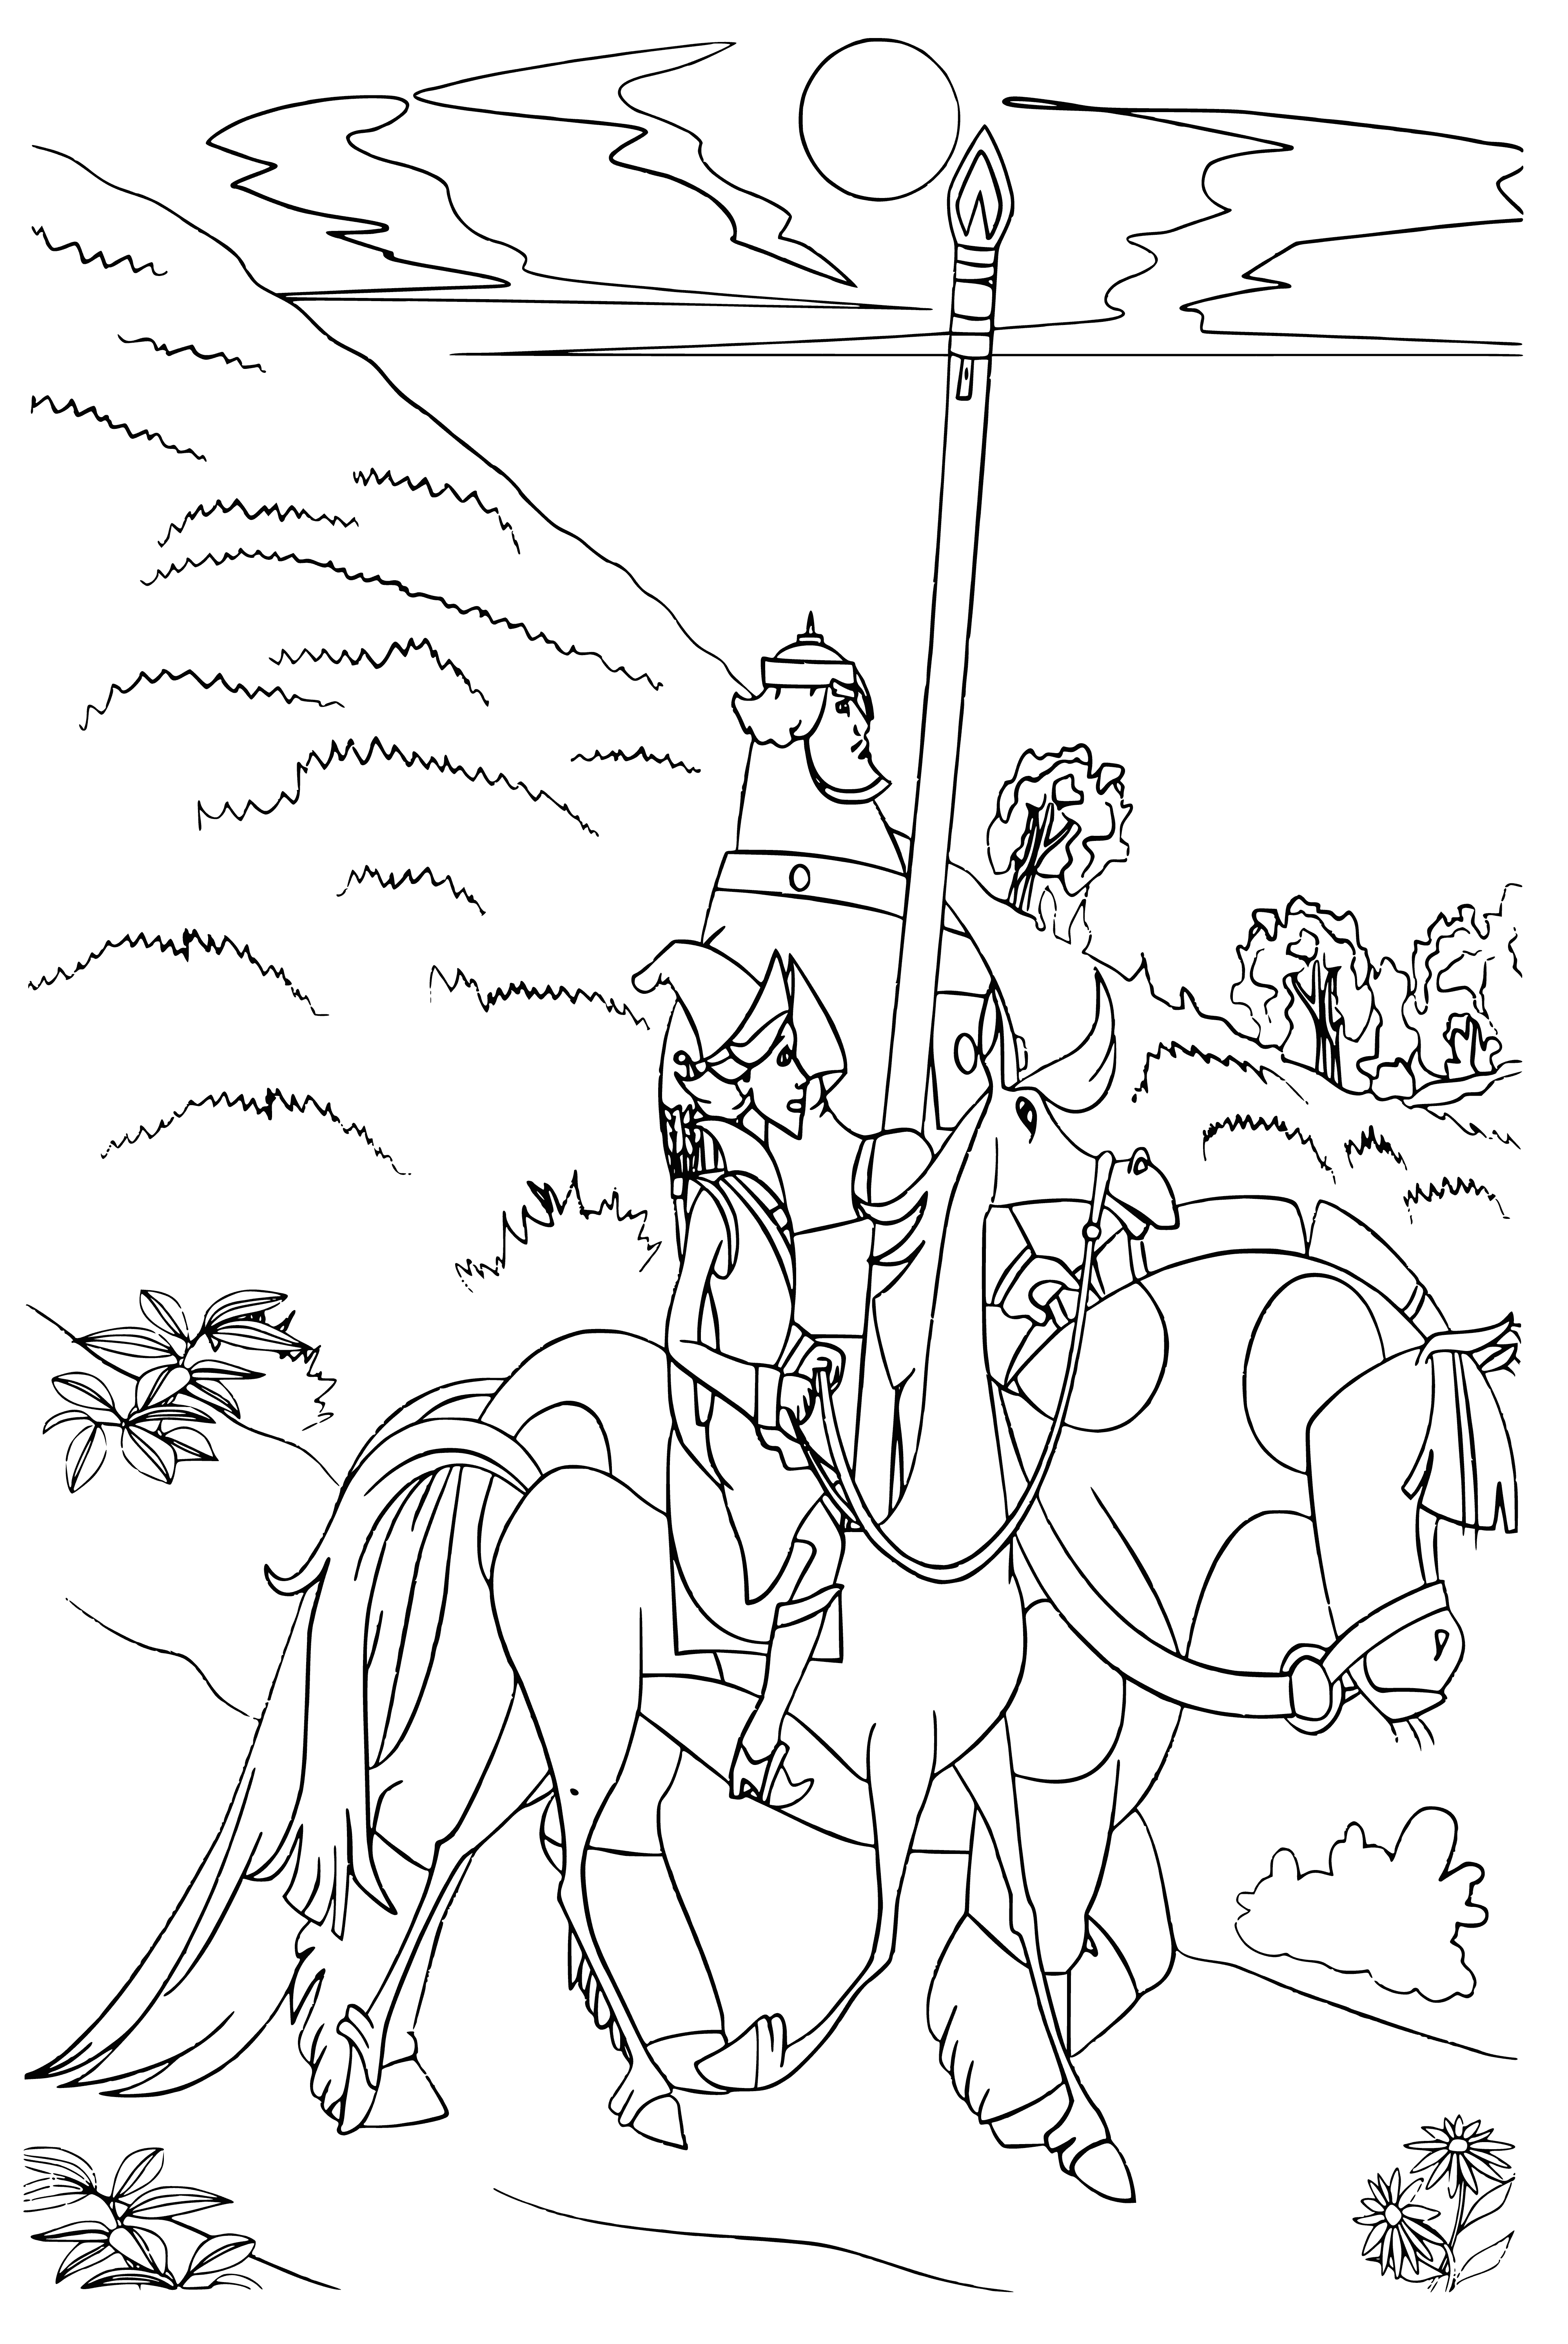 coloring page: Dobrynya Nikitich stands atop a hill, sword in hand, looking down upon the 3-headed Gorynych, surrounded by fire.